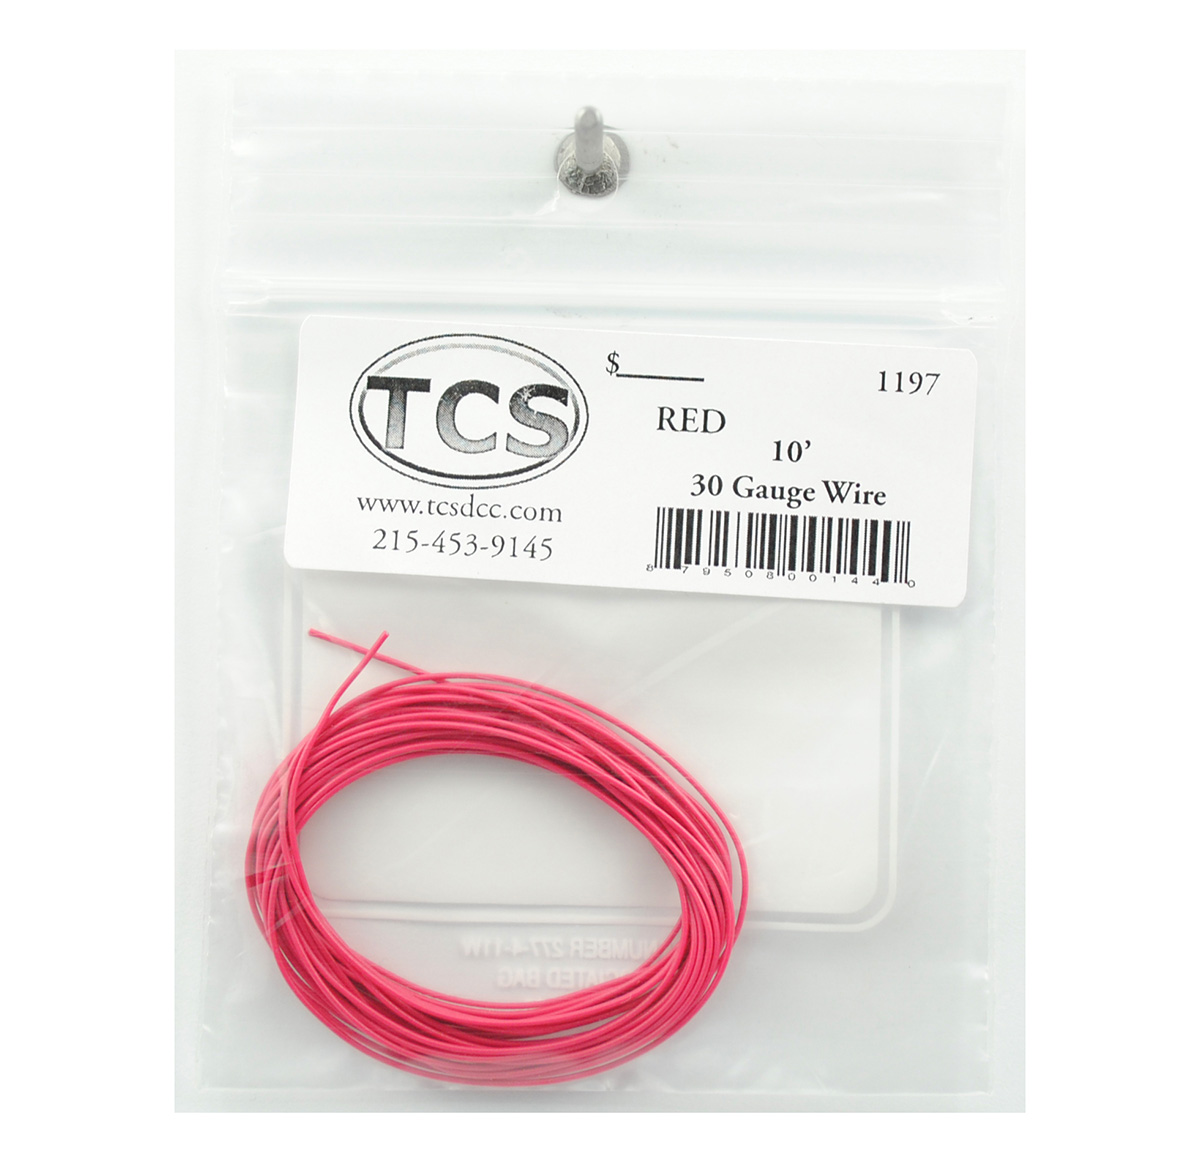 Tcs1197 10 Ft. 30 Gauge Wire, Red